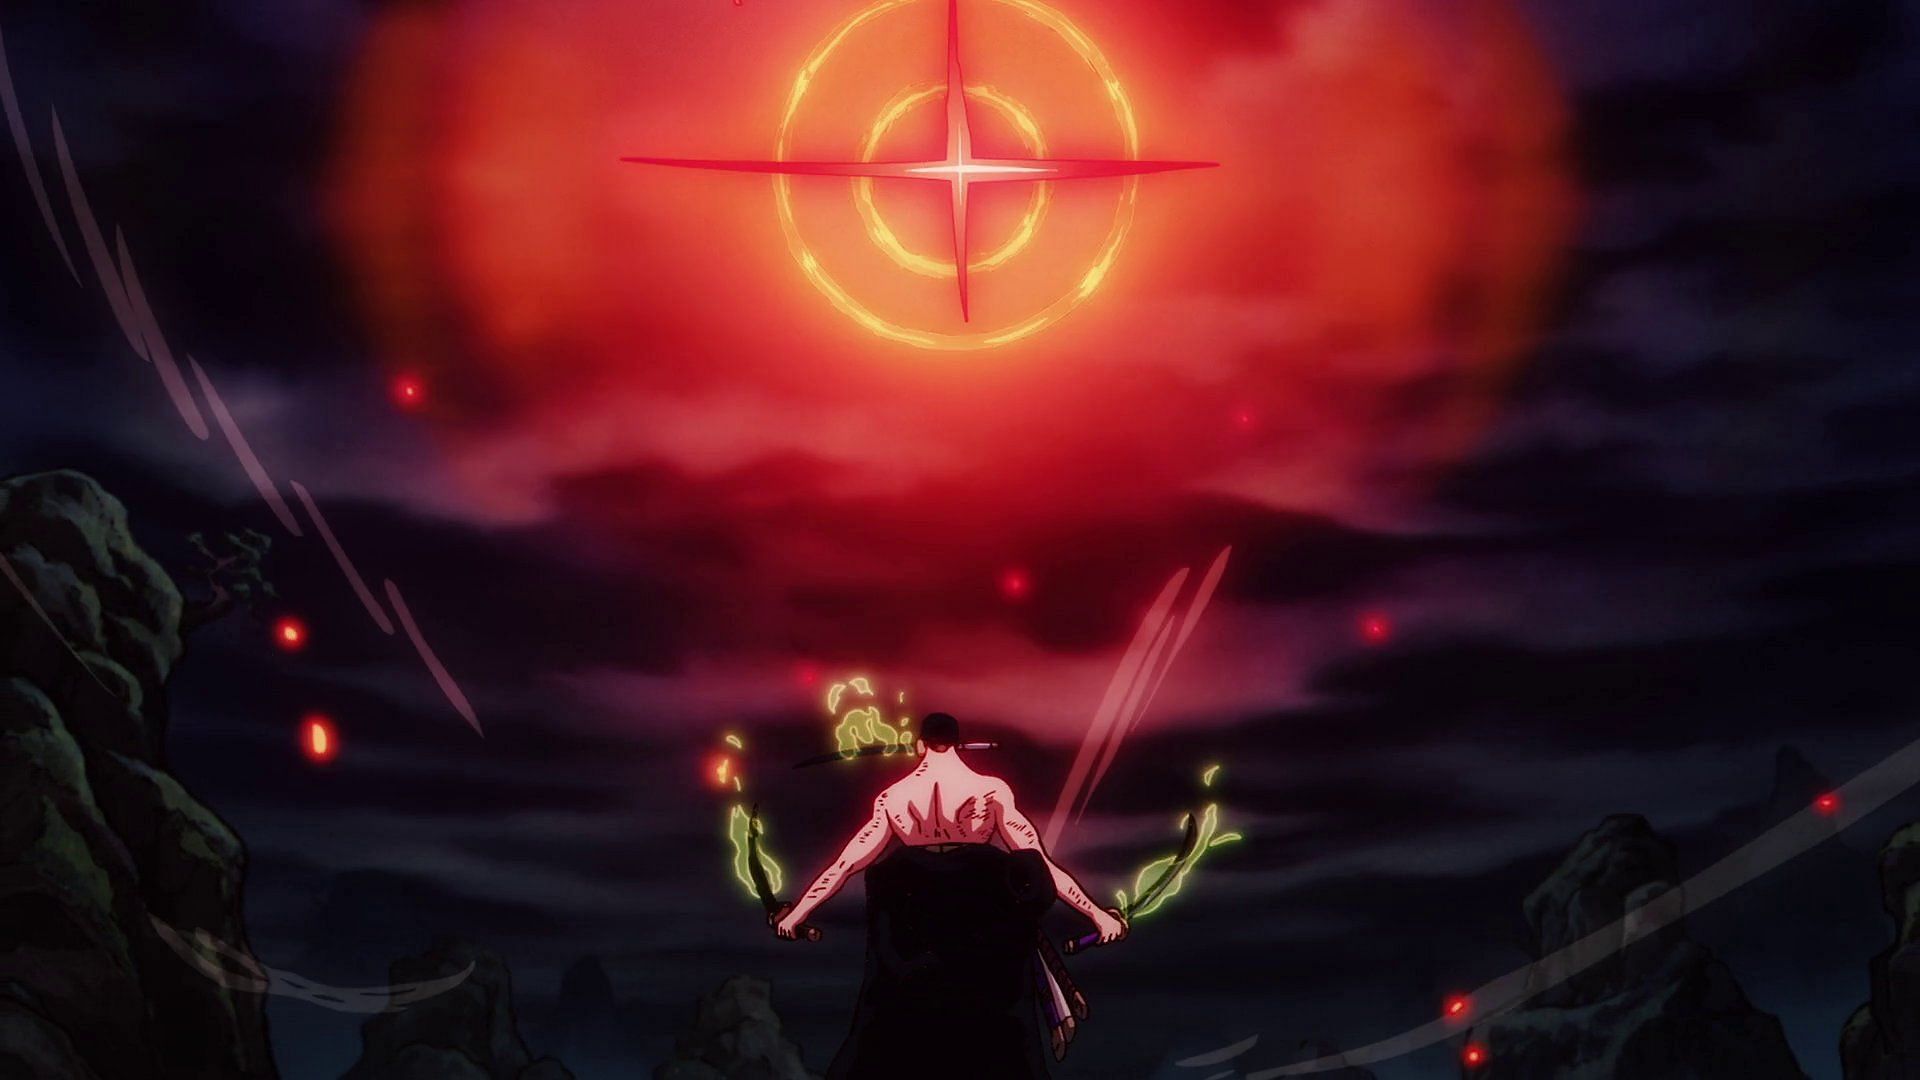 One Piece Chapter 1032: Zoro to defeat King with black blade sword  (multiple fights expected)